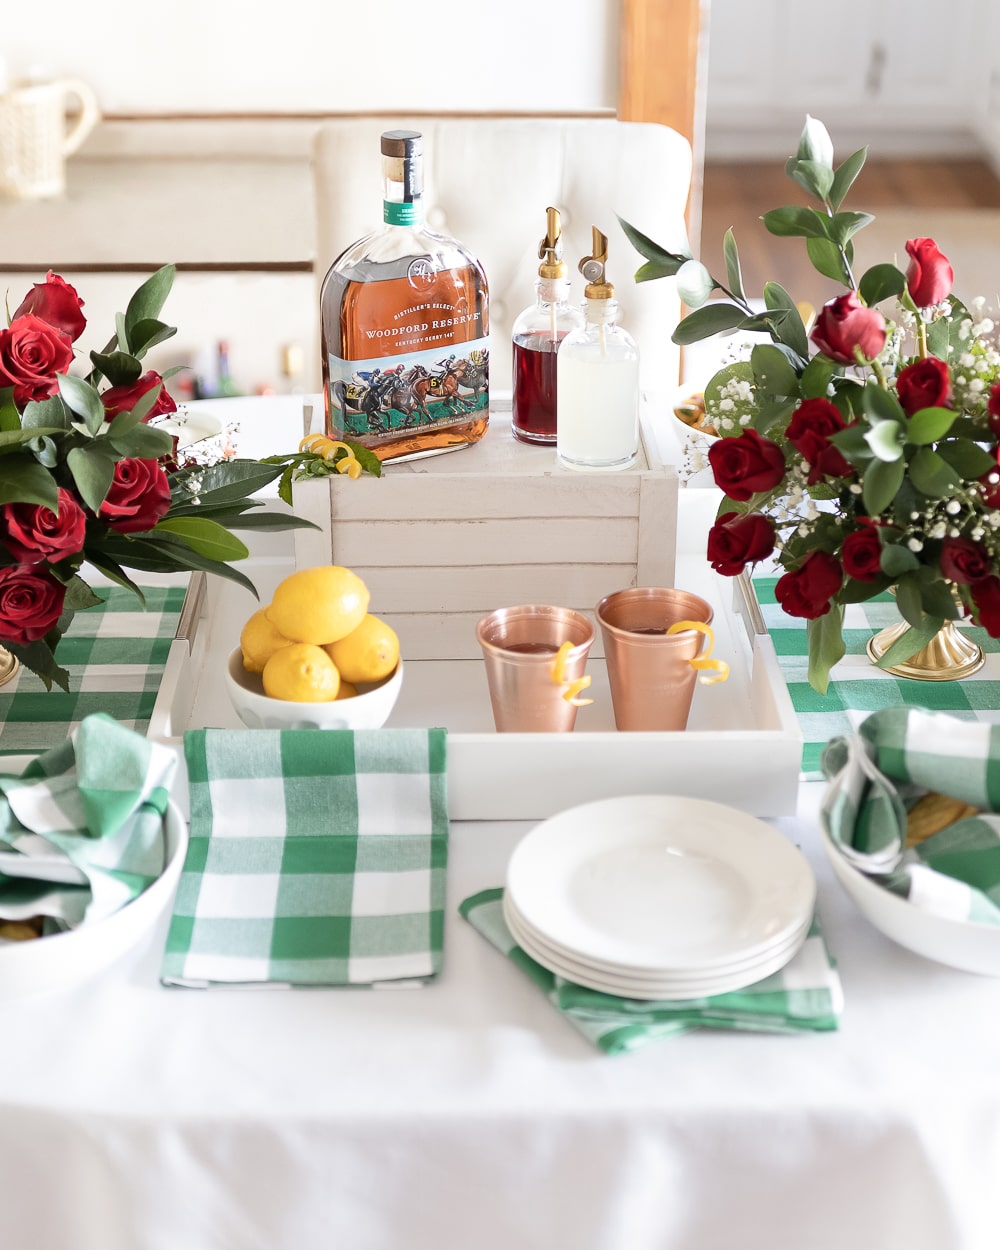 Kentucky Derby party decorations designed by southern blogger Stephanie Ziajka on Diary of a Debutante